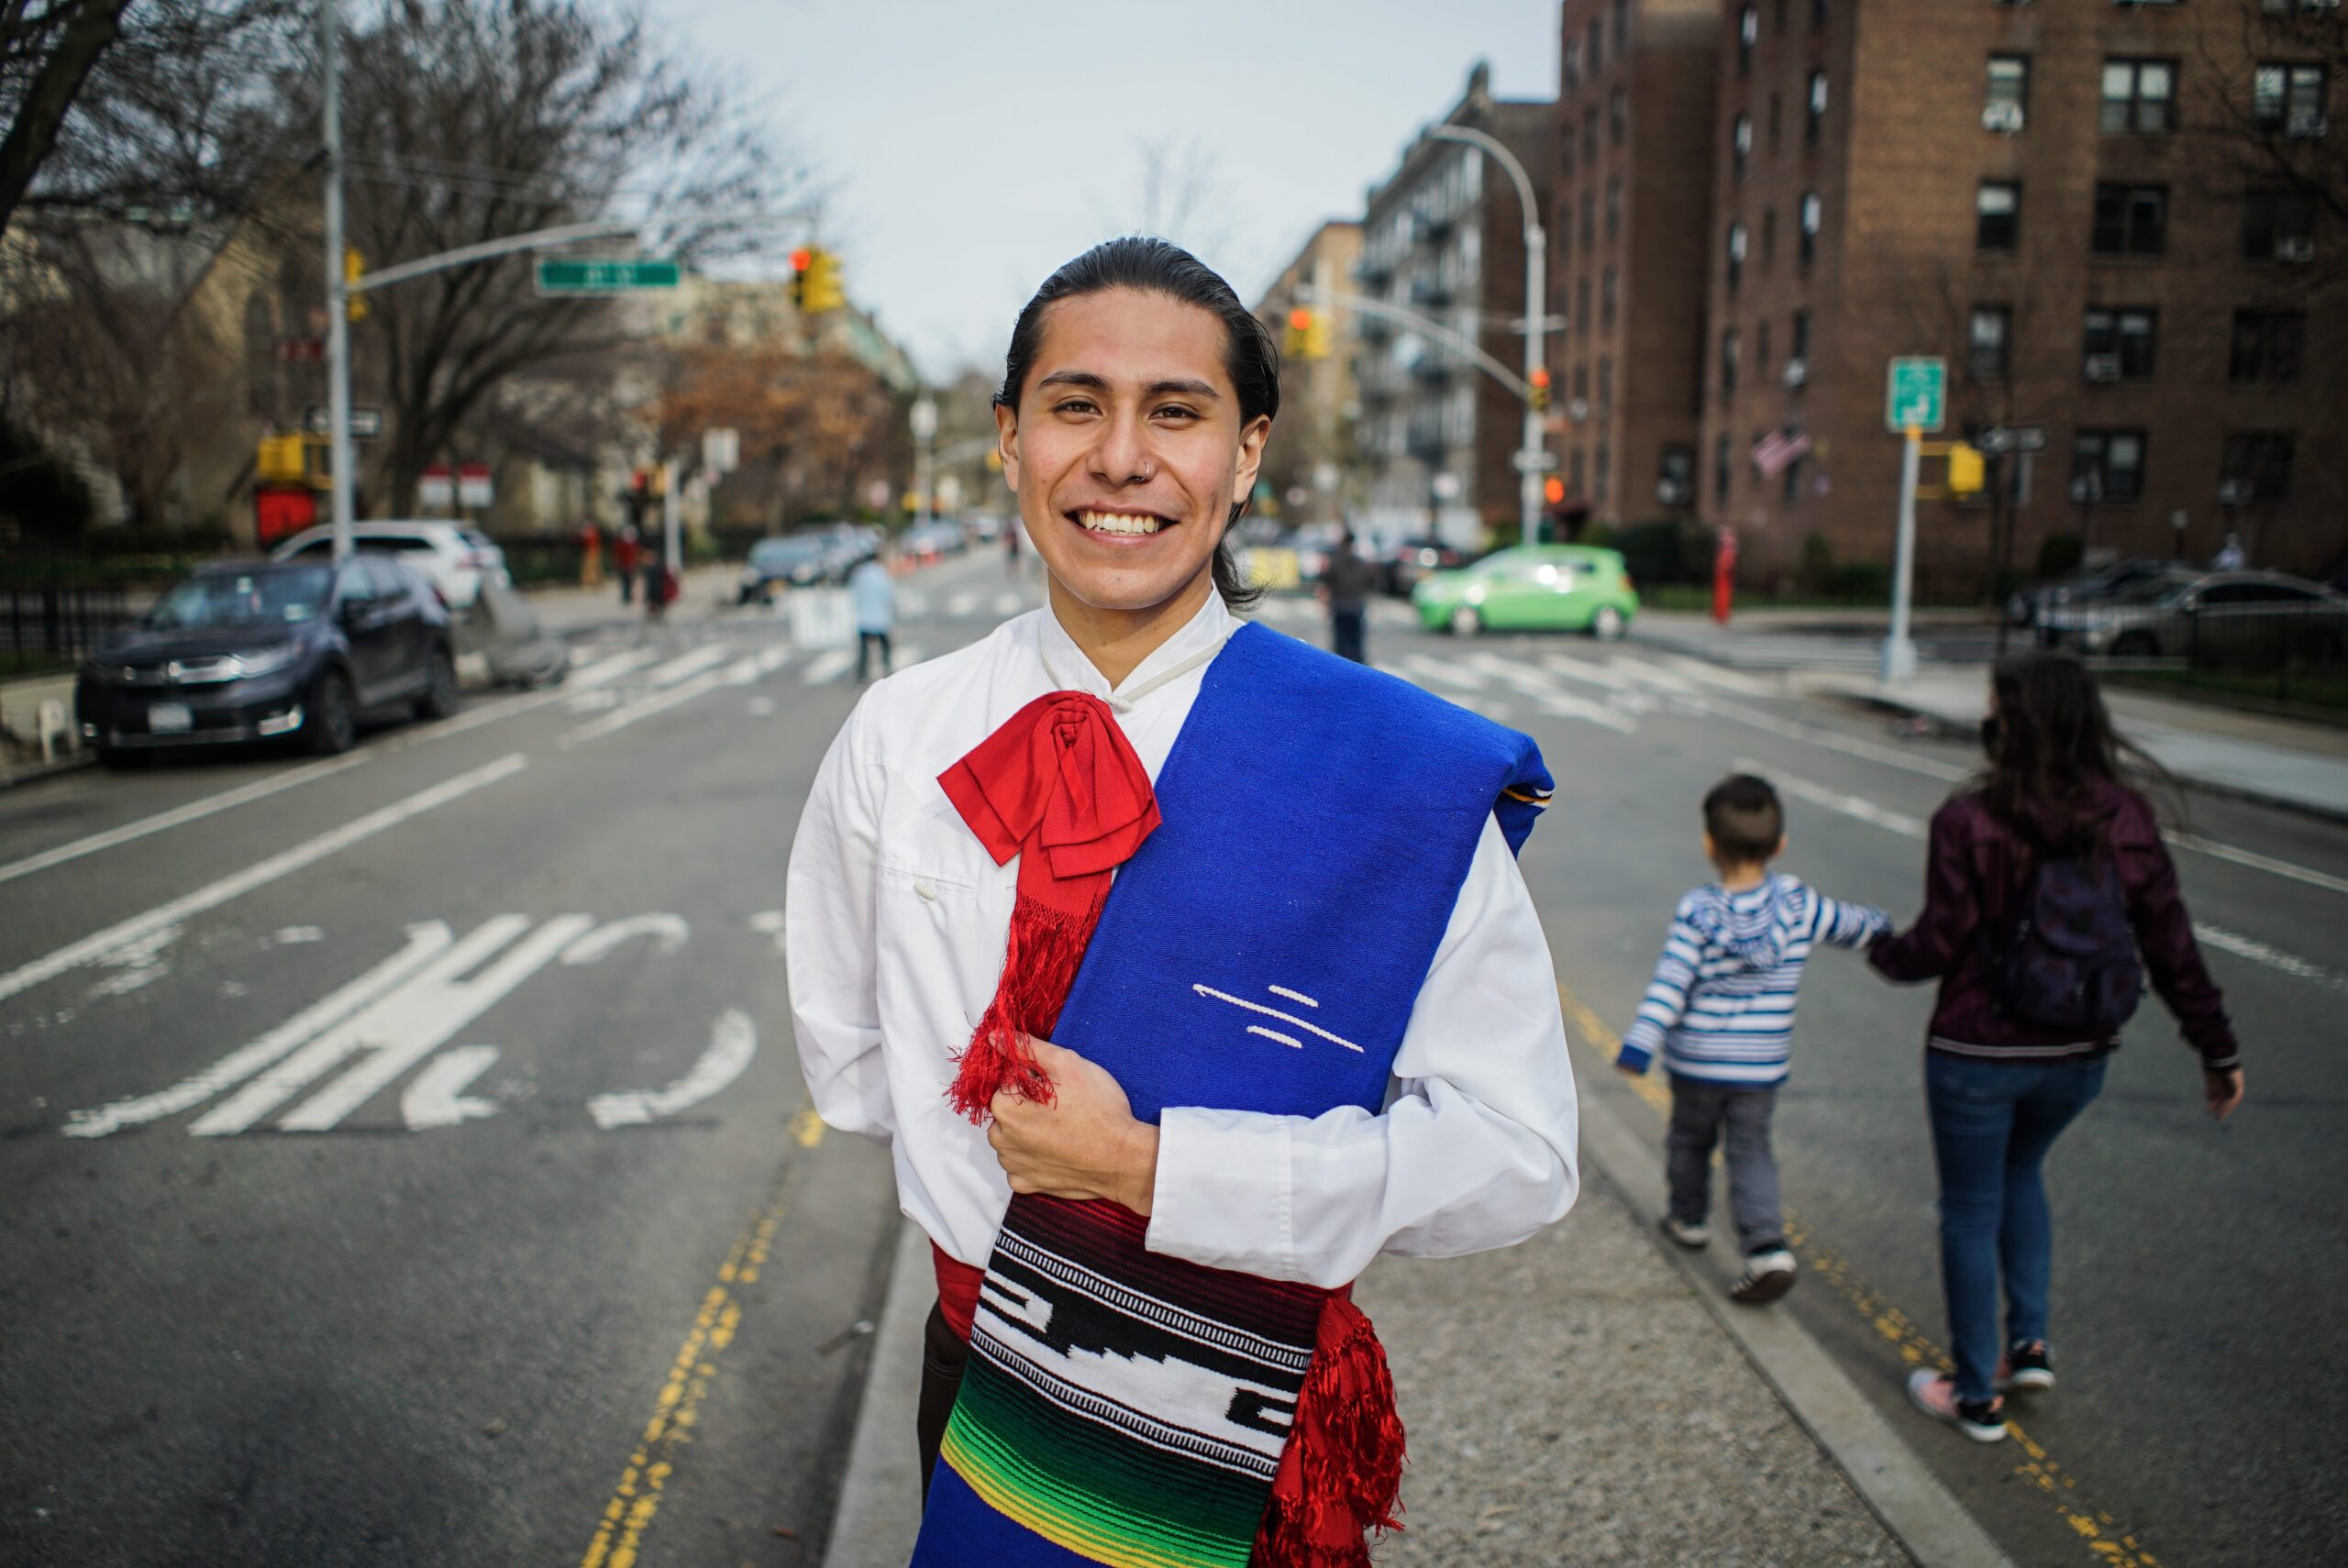 Erick Modesto stands on the median of 34th Avenue smiling and looking into the camera. Behind him, a boy balances on the curb of the median while a woman holds his hand. Erick is wearing a traditional ballet folklorico costume.